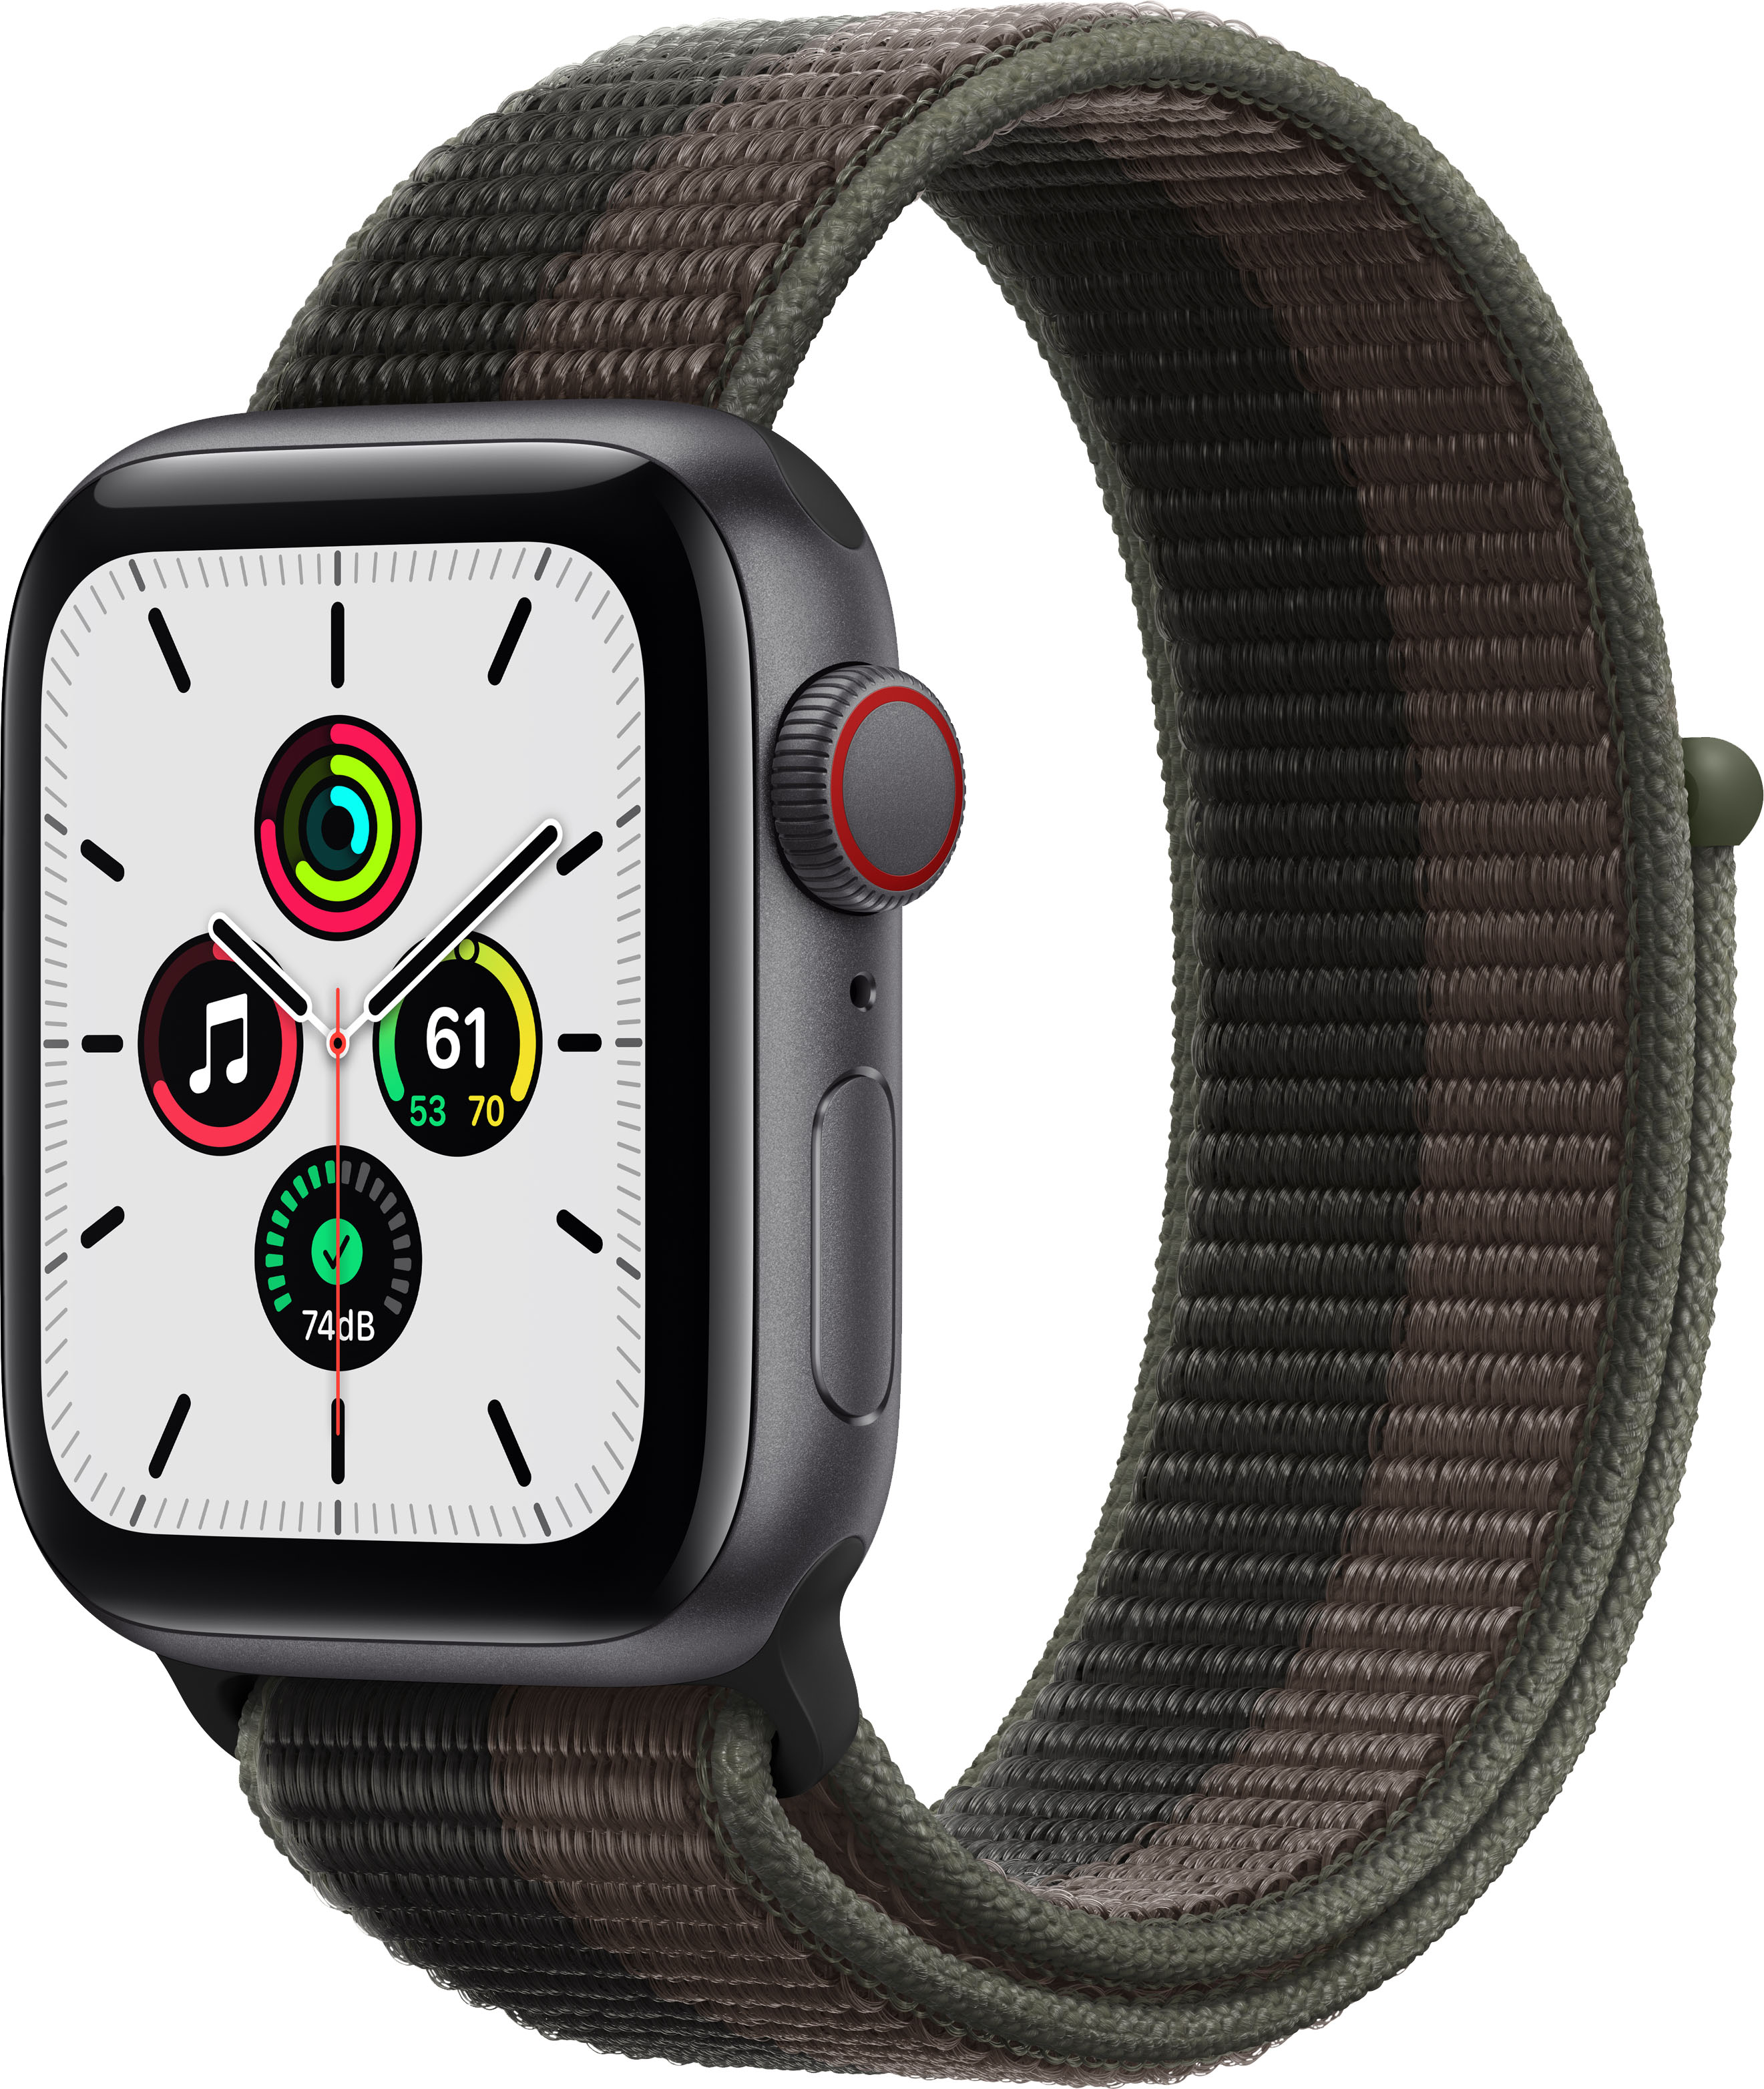 Space Sport Gray (1st + Space 40mm Apple Buy: Loop Case Aluminum Tornado/Gray Generation with Watch SE Cellular) Gray (Verizon) MKQR3LL/A Best GPS